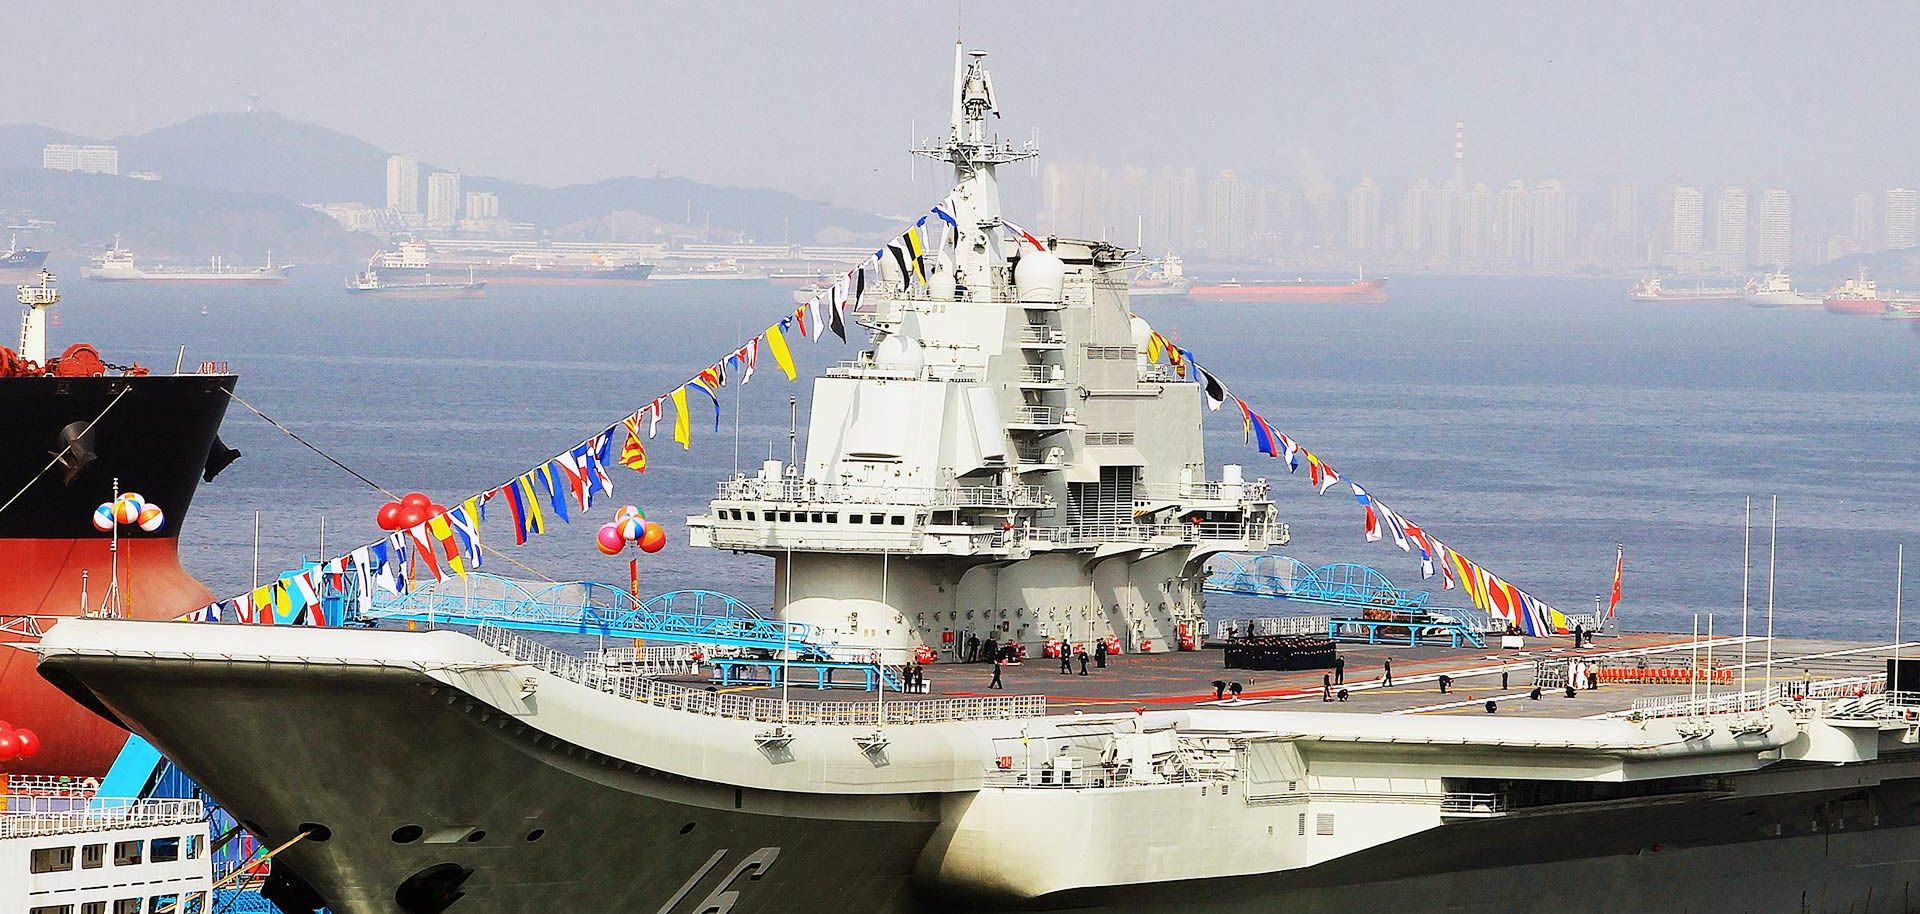 China's first aircraft carrier is docked in the northeastern Liaoning province. The Chinese navy will continue to increase its forays and deployments around the globe. After all, Beijing is doing all it can to build out a maritime presence commensurate with its status -- and logistics are the key.